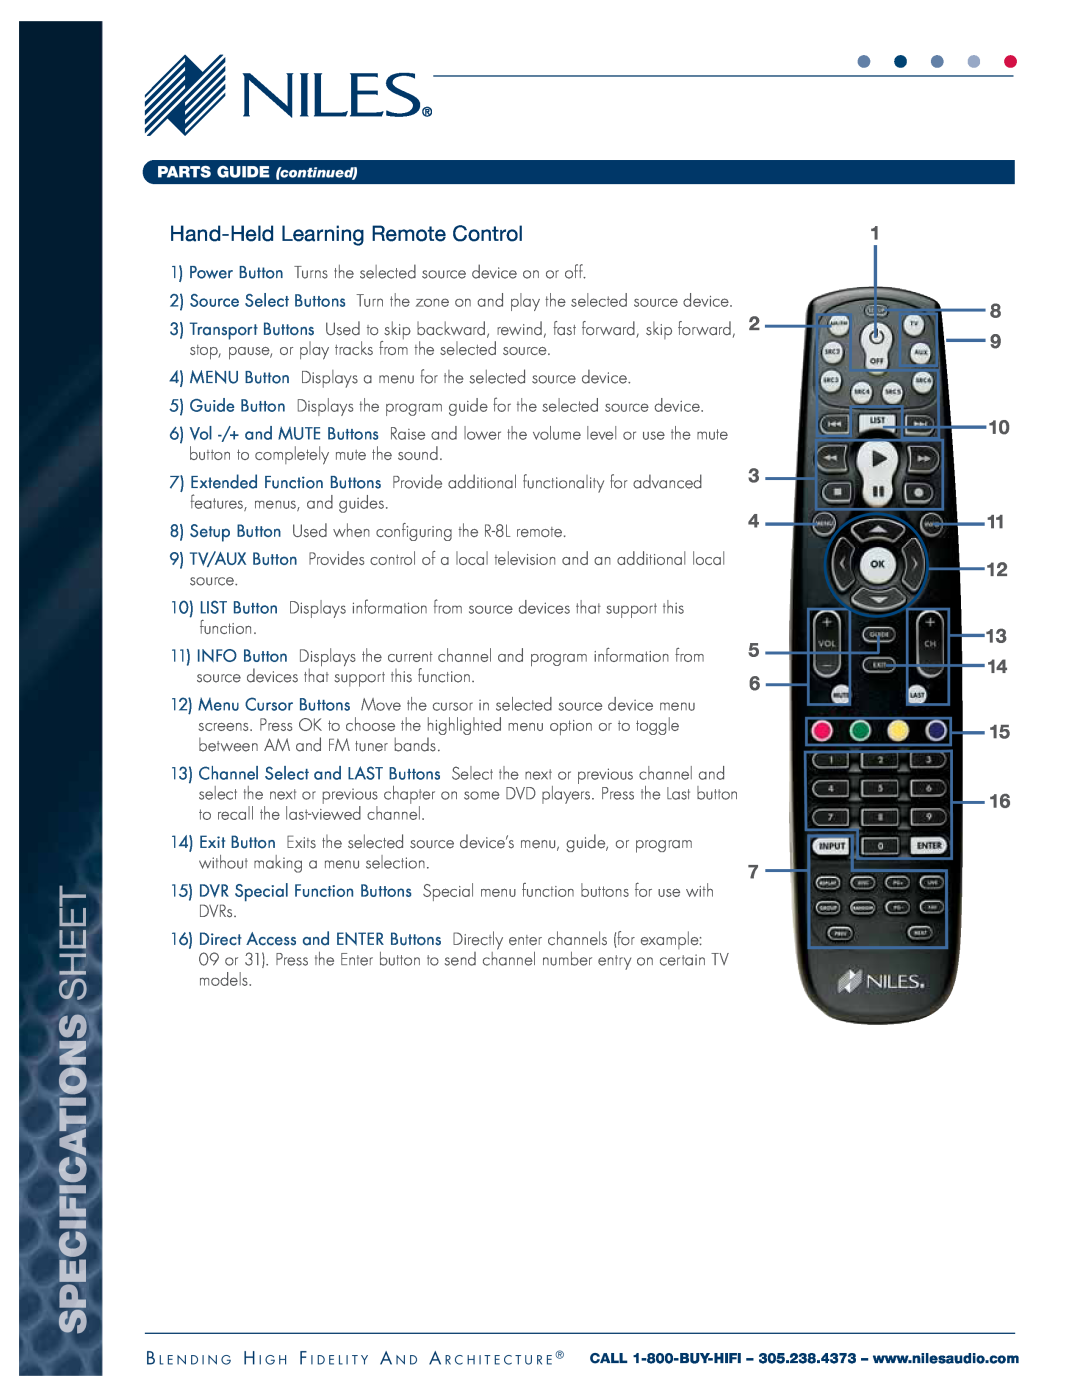 Niles Audio ZR-6 Hand-HeldLearning Remote Control, PARTS GUIDE continued, Specifications Sheet, 8 9 10 11 12 13 14 15 